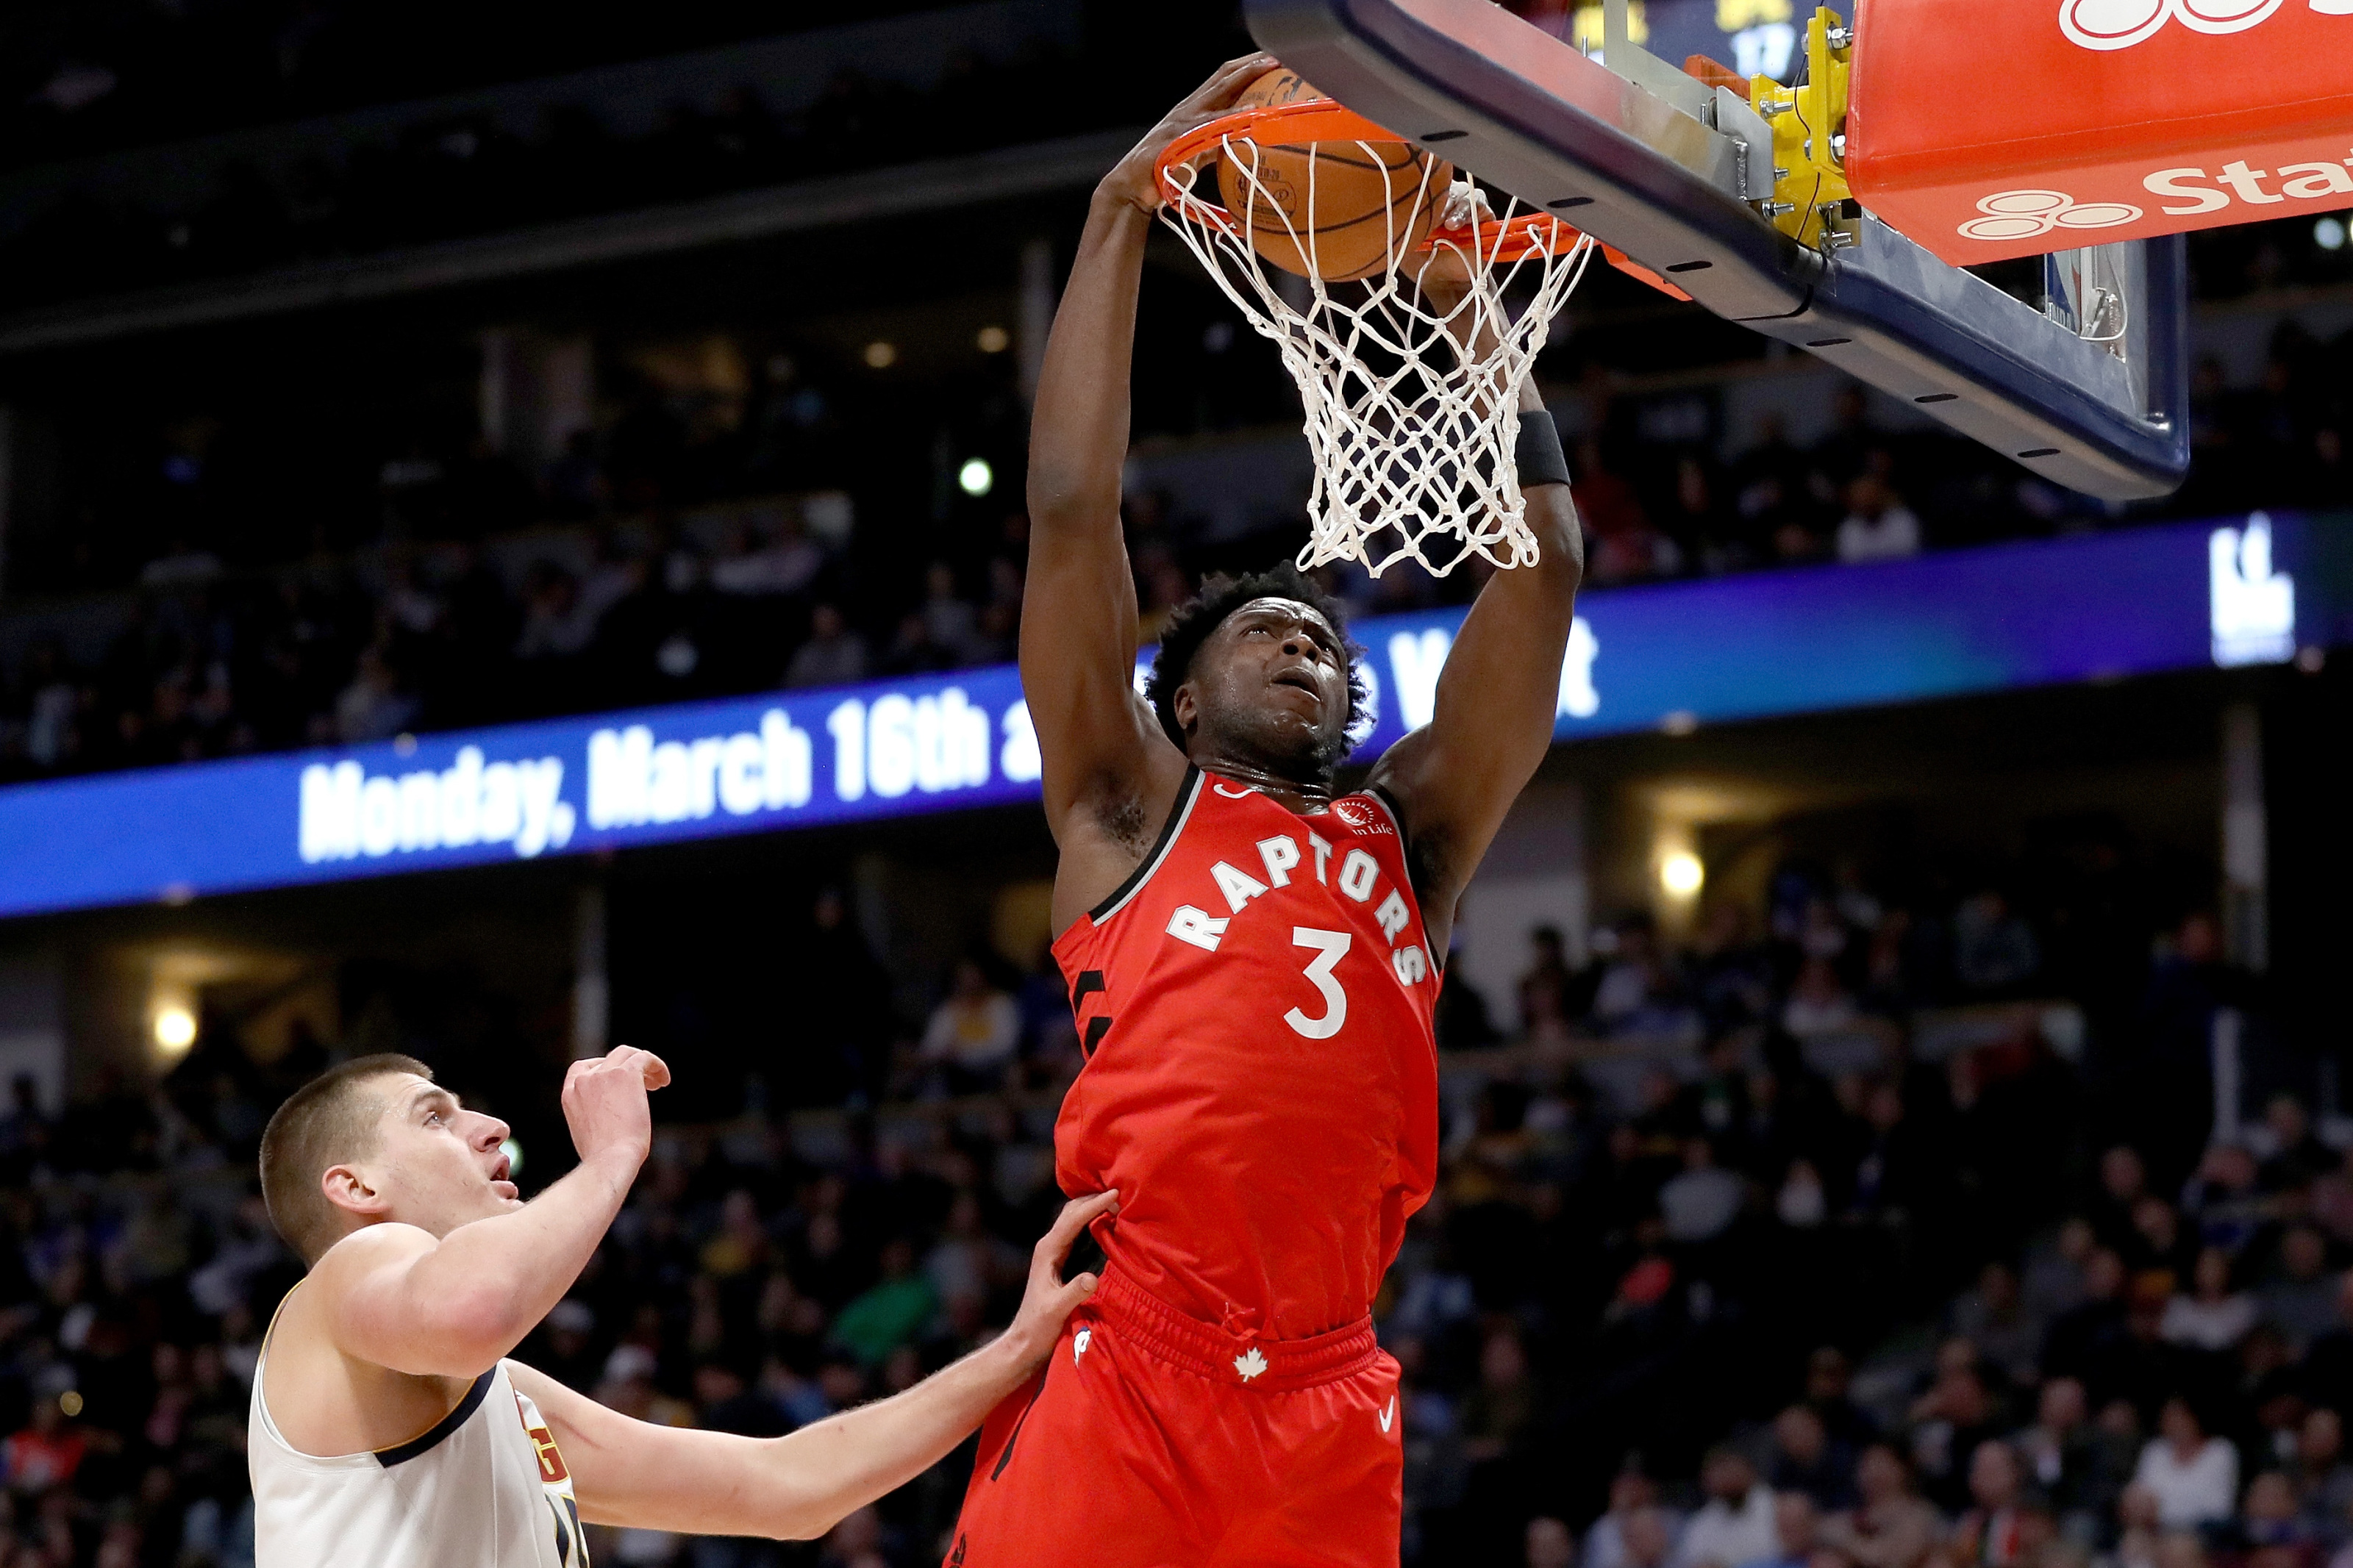 Indiana Basketball: OG Anunoby is the key to Toronto's playoffs